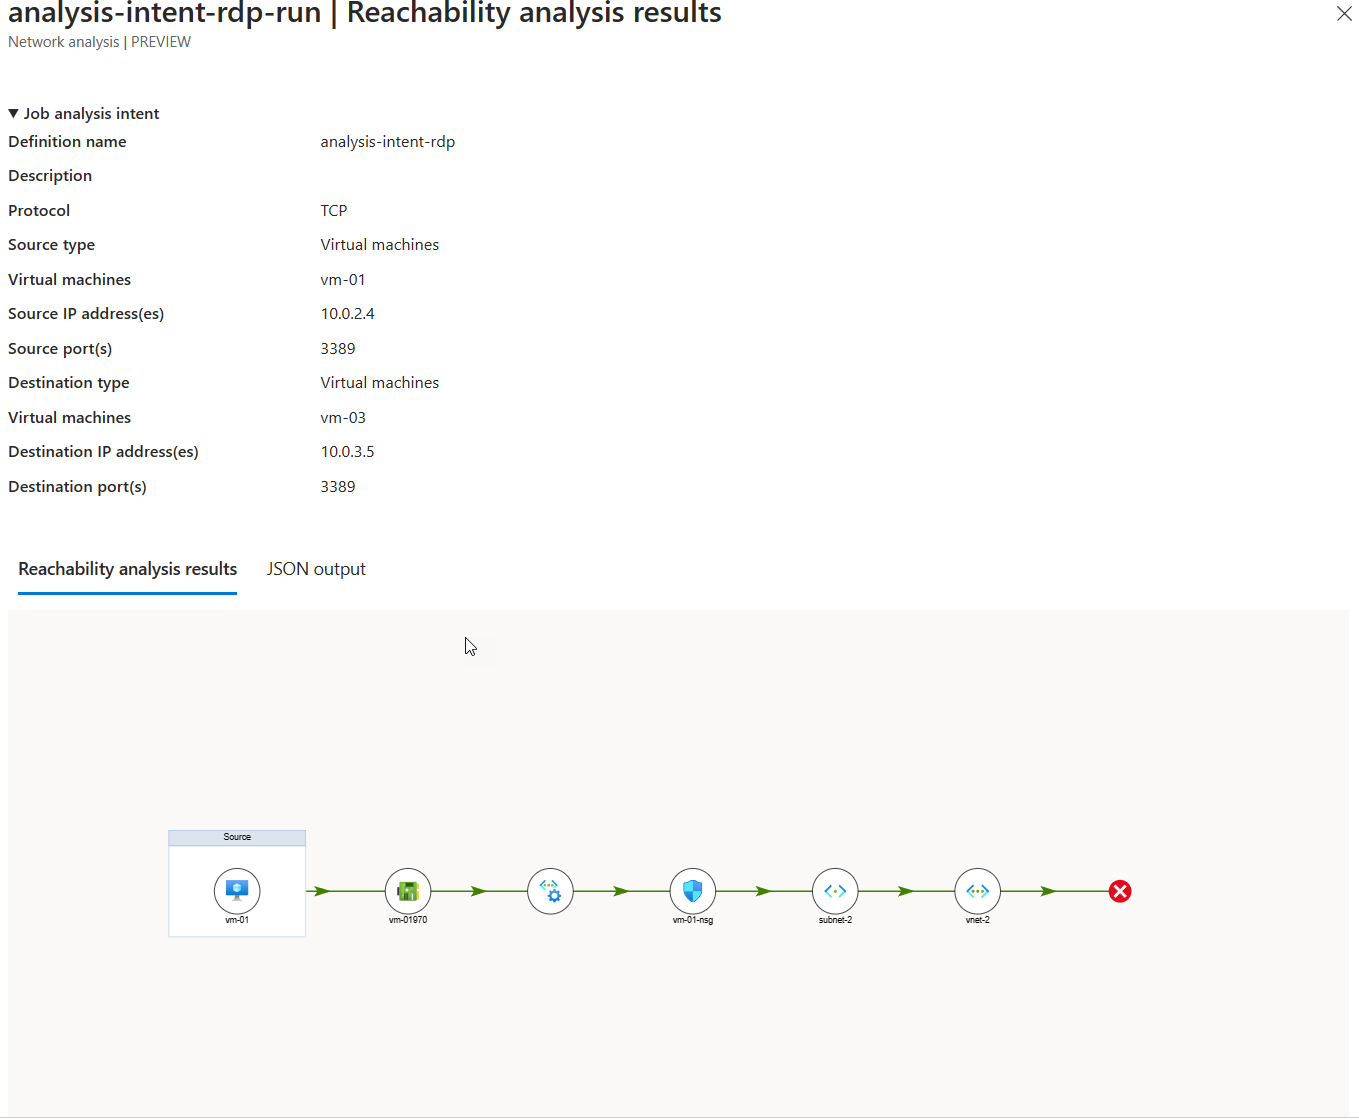 Screenshot of Reachability analysis results window with analysis results.